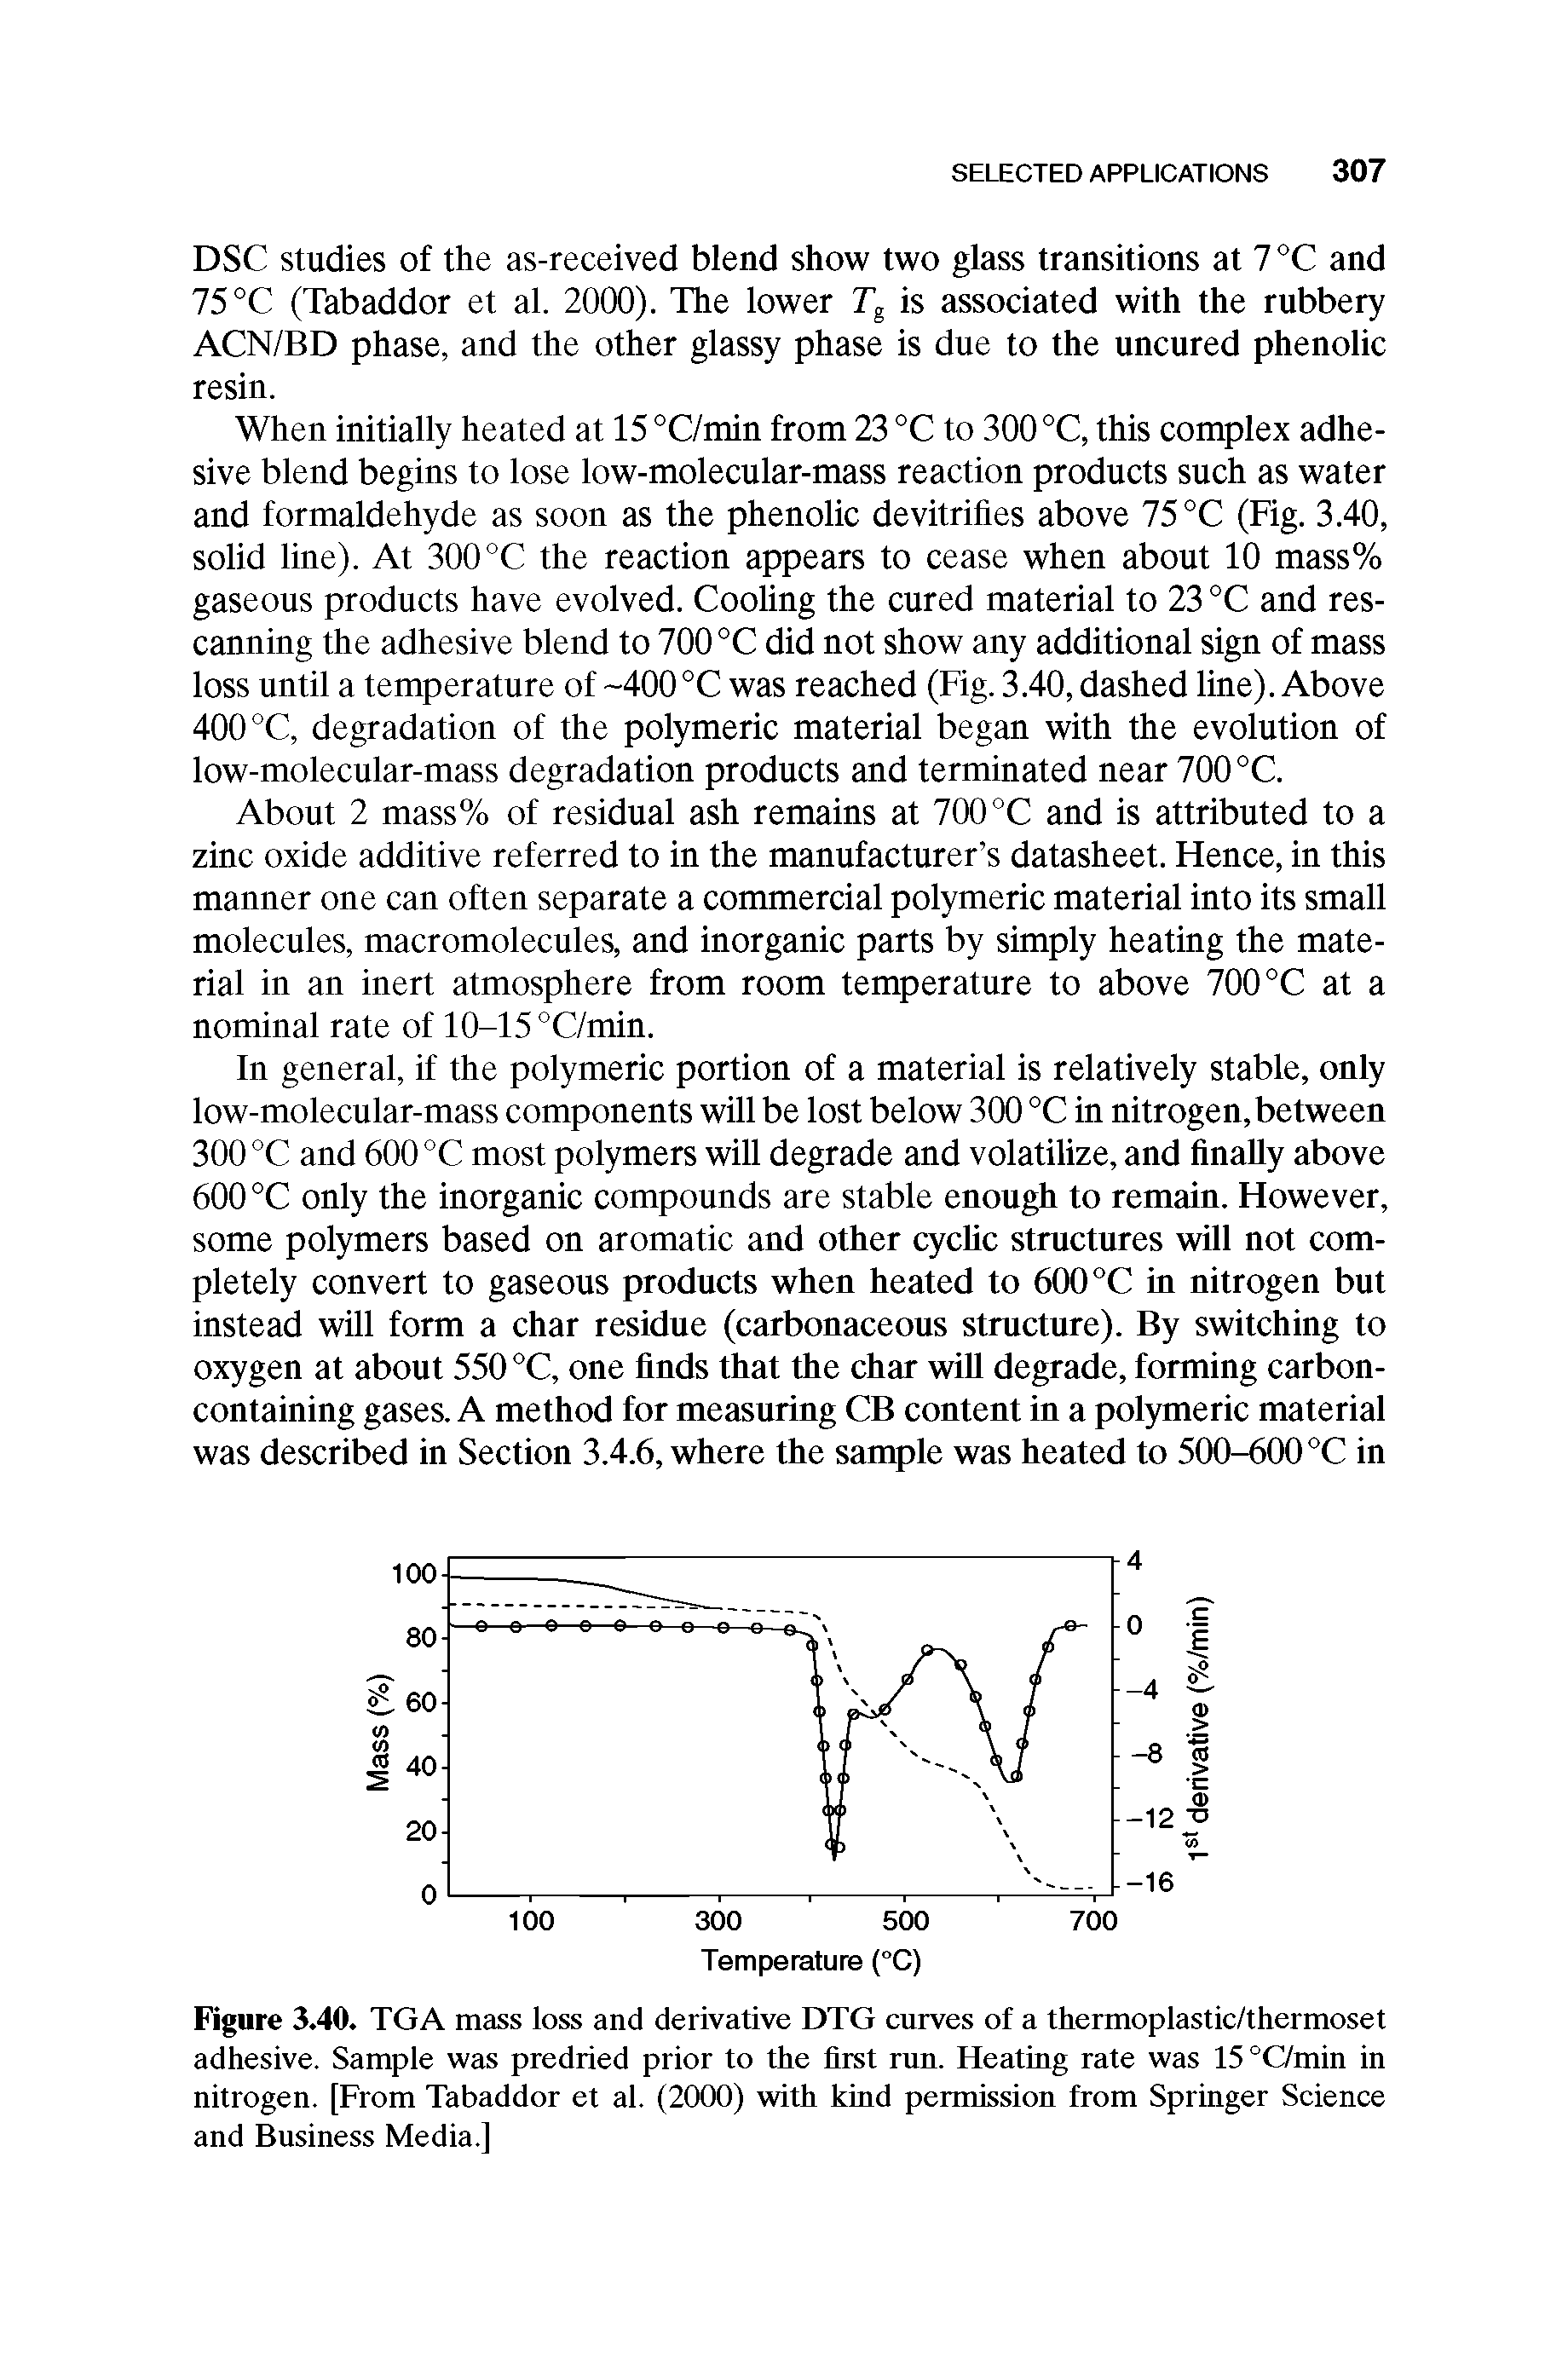 Figure 3.40. TGA mass loss and derivative DTG curves of a thermoplastic/thermoset adhesive. Sample was predried prior to the first run. Heating rate was 15 °C/min in nitrogen. [From Tabaddor et al. (2000) with kind permission from Springer Science and Business Media.l...